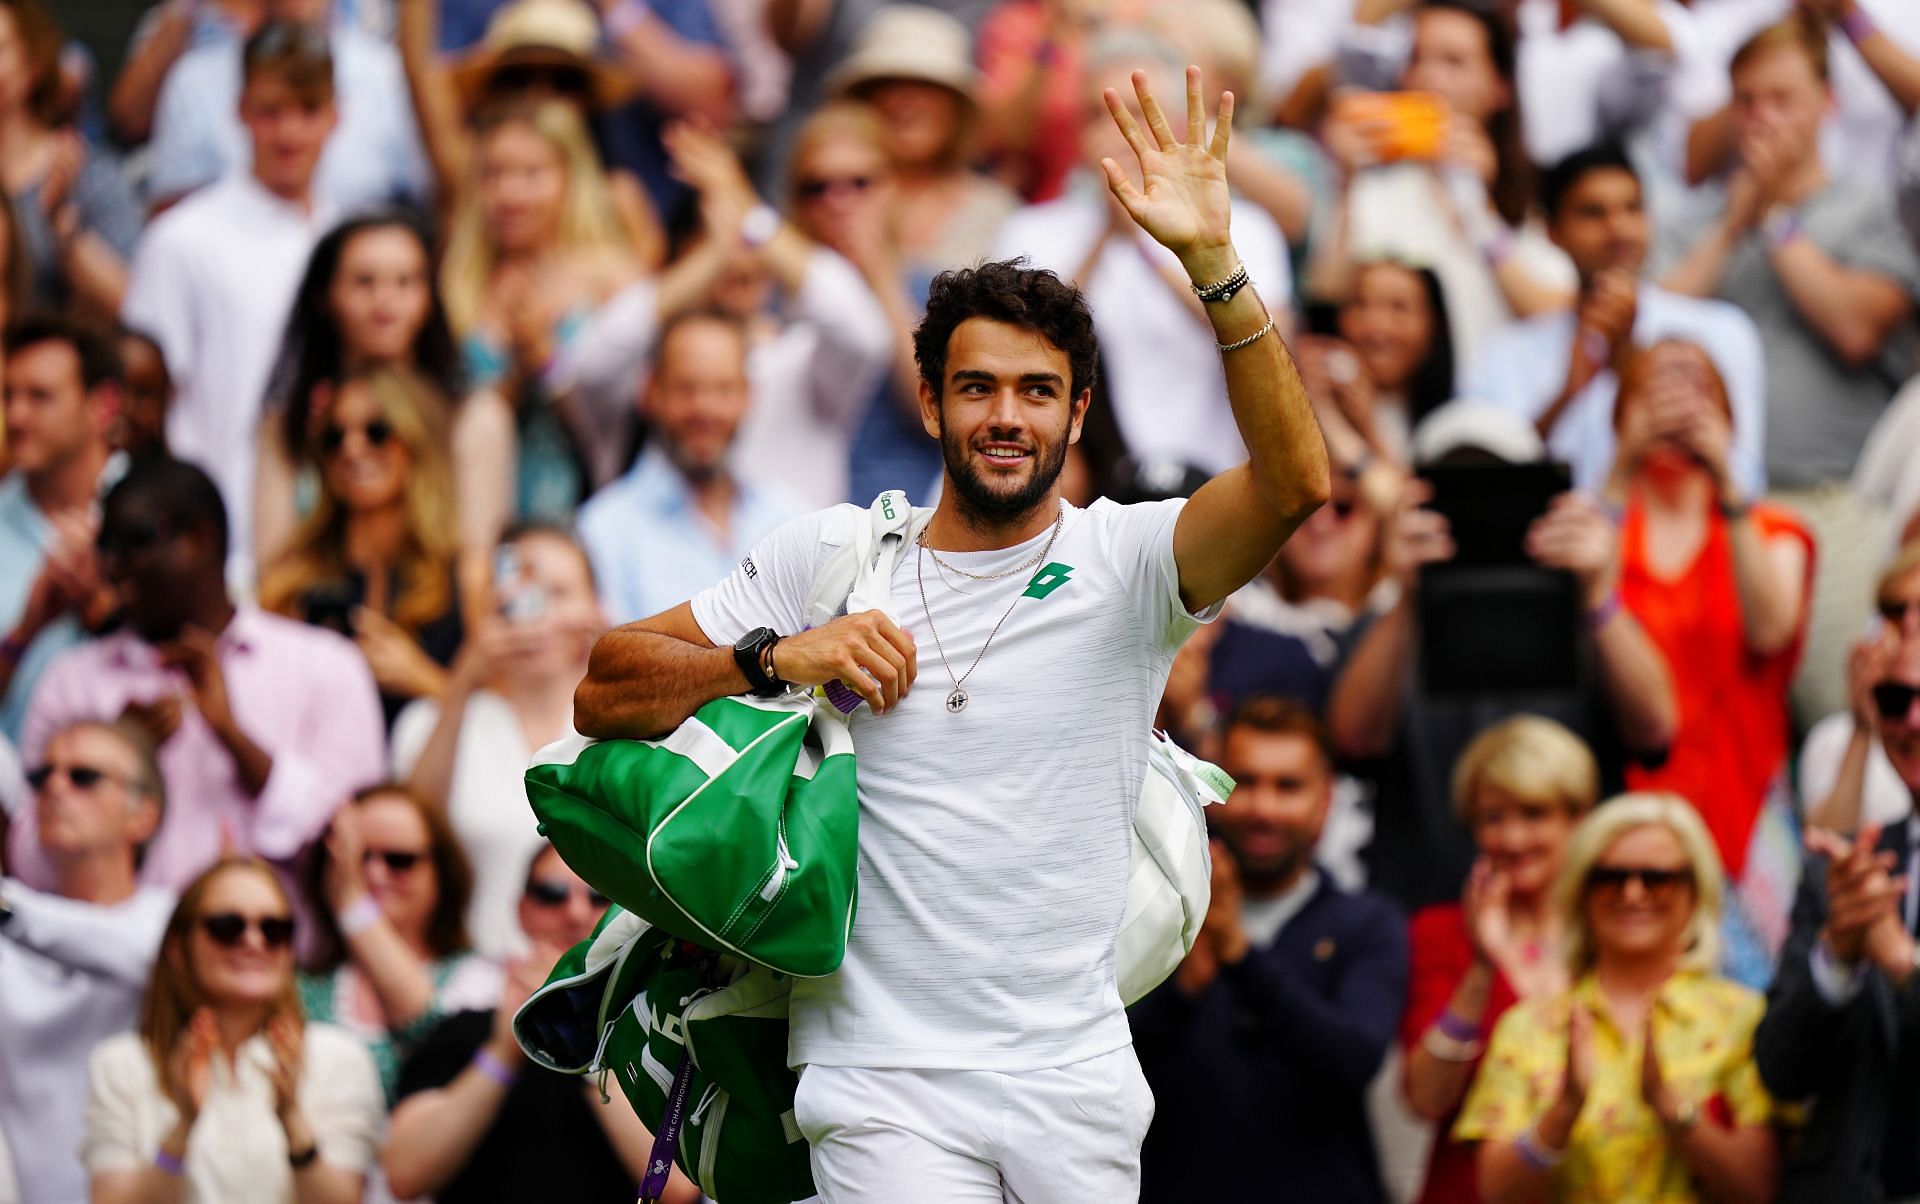 Matteo Berrettini is the top seed at the 2022 Rio Open